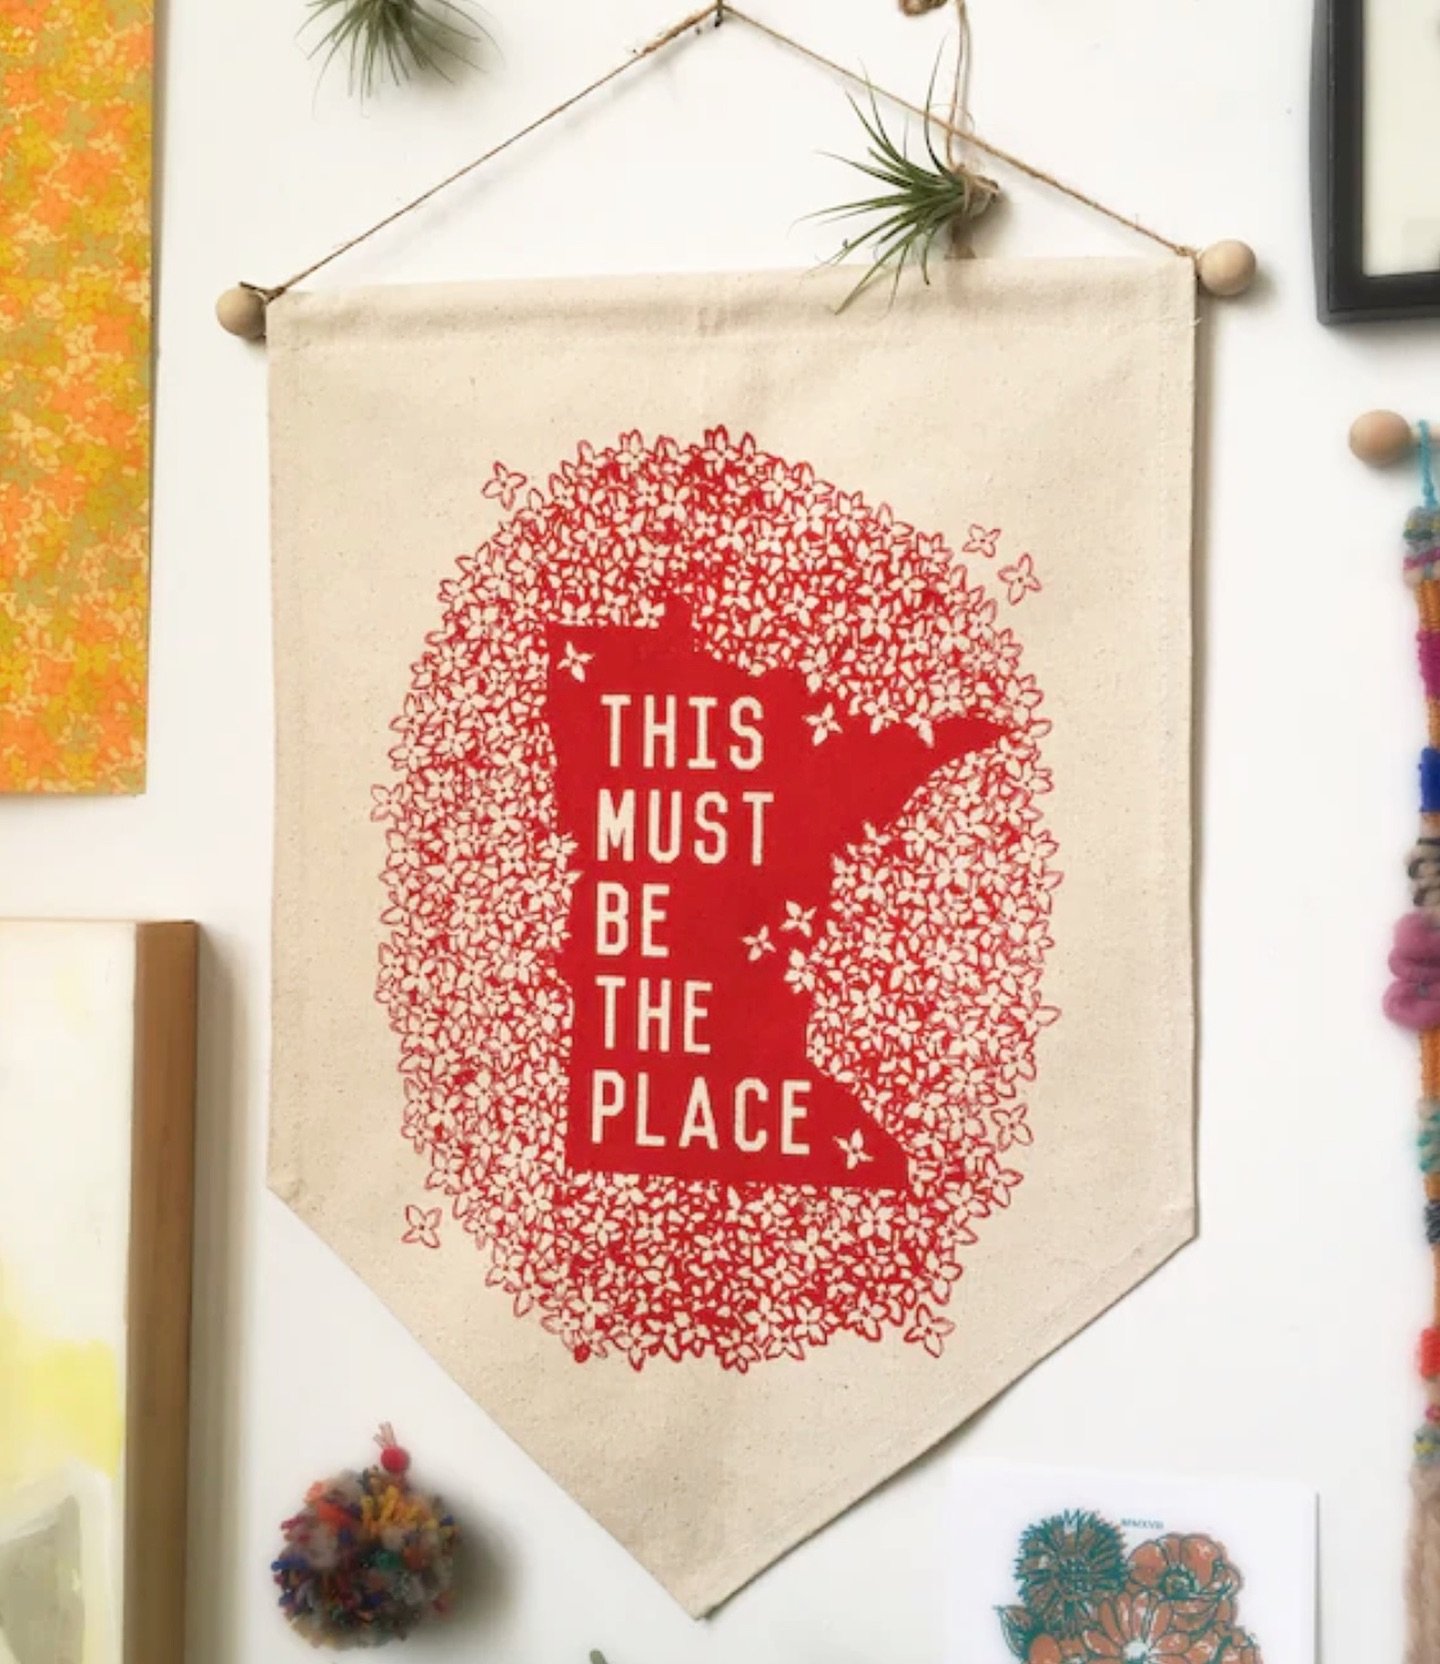 Talking heads really knew what they were talking about when they said &ldquo;This must be the place&rdquo; 

&hellip; and they were DEFINITELY singing about Minnesota 😏😉

Adorable wall hangings available now! 

#thismustbetheplace #talkingheads #mi